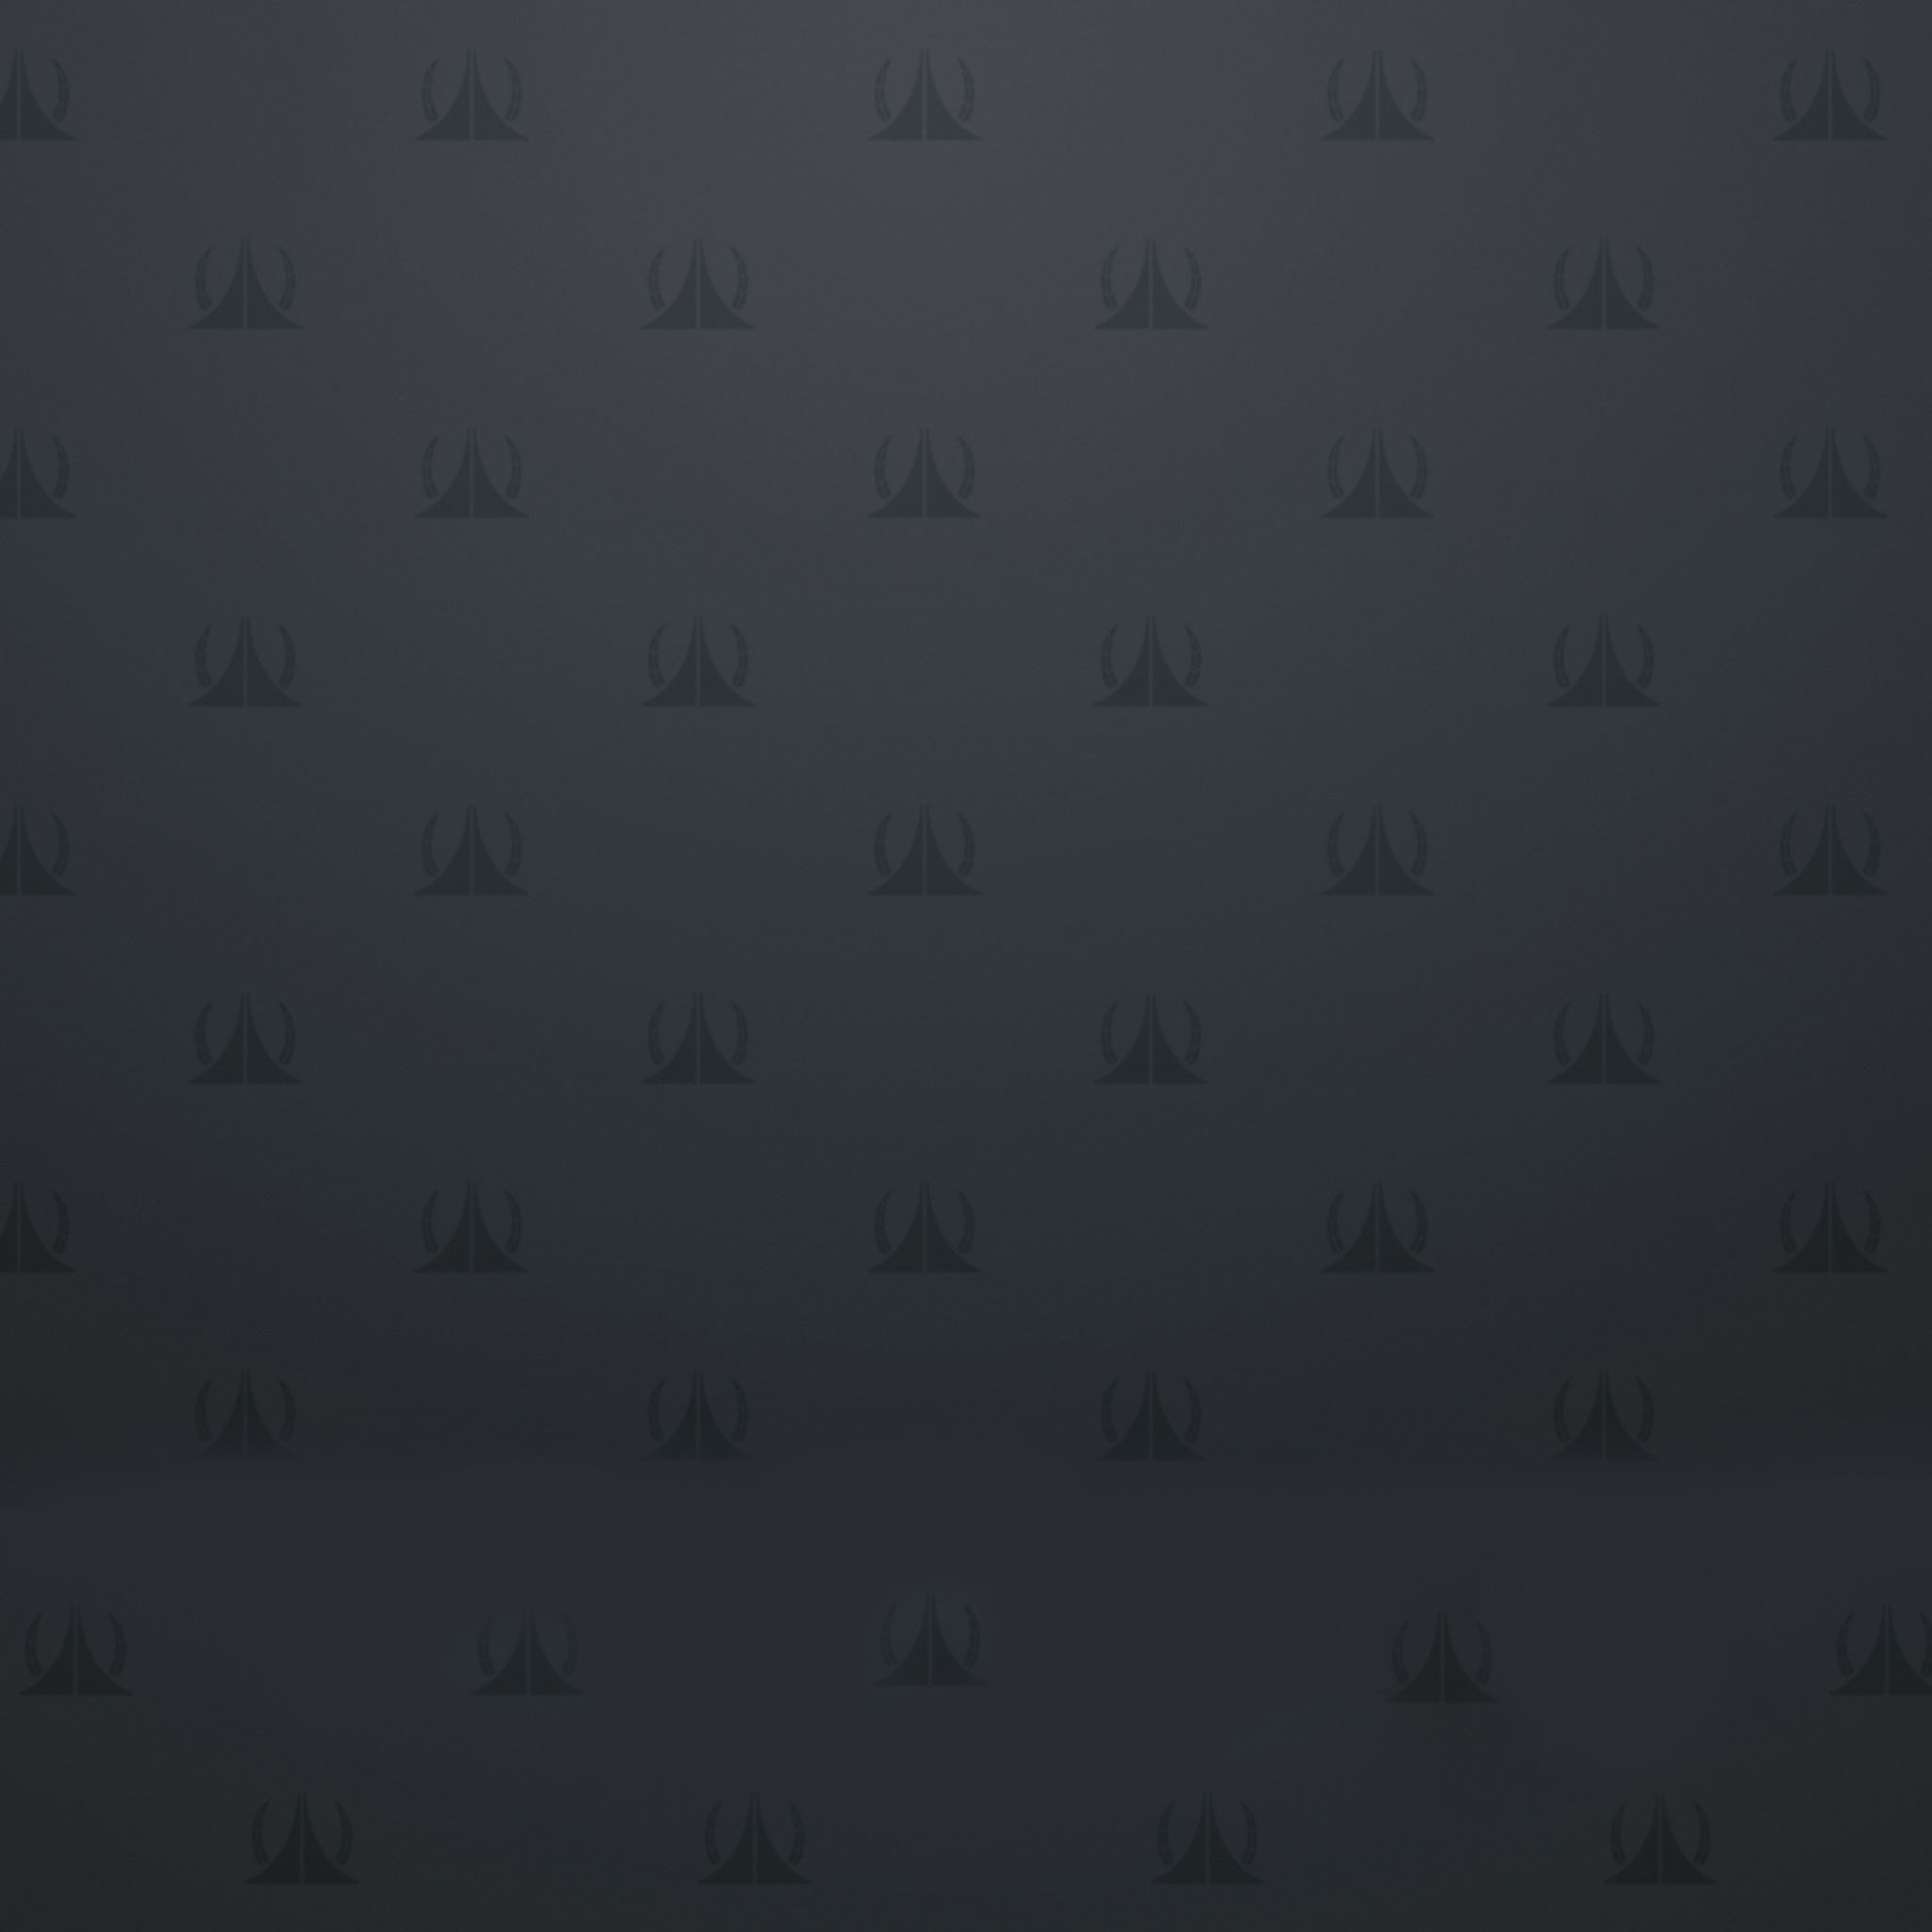 Pattern on the Gray Background iPad Air wallpaper 